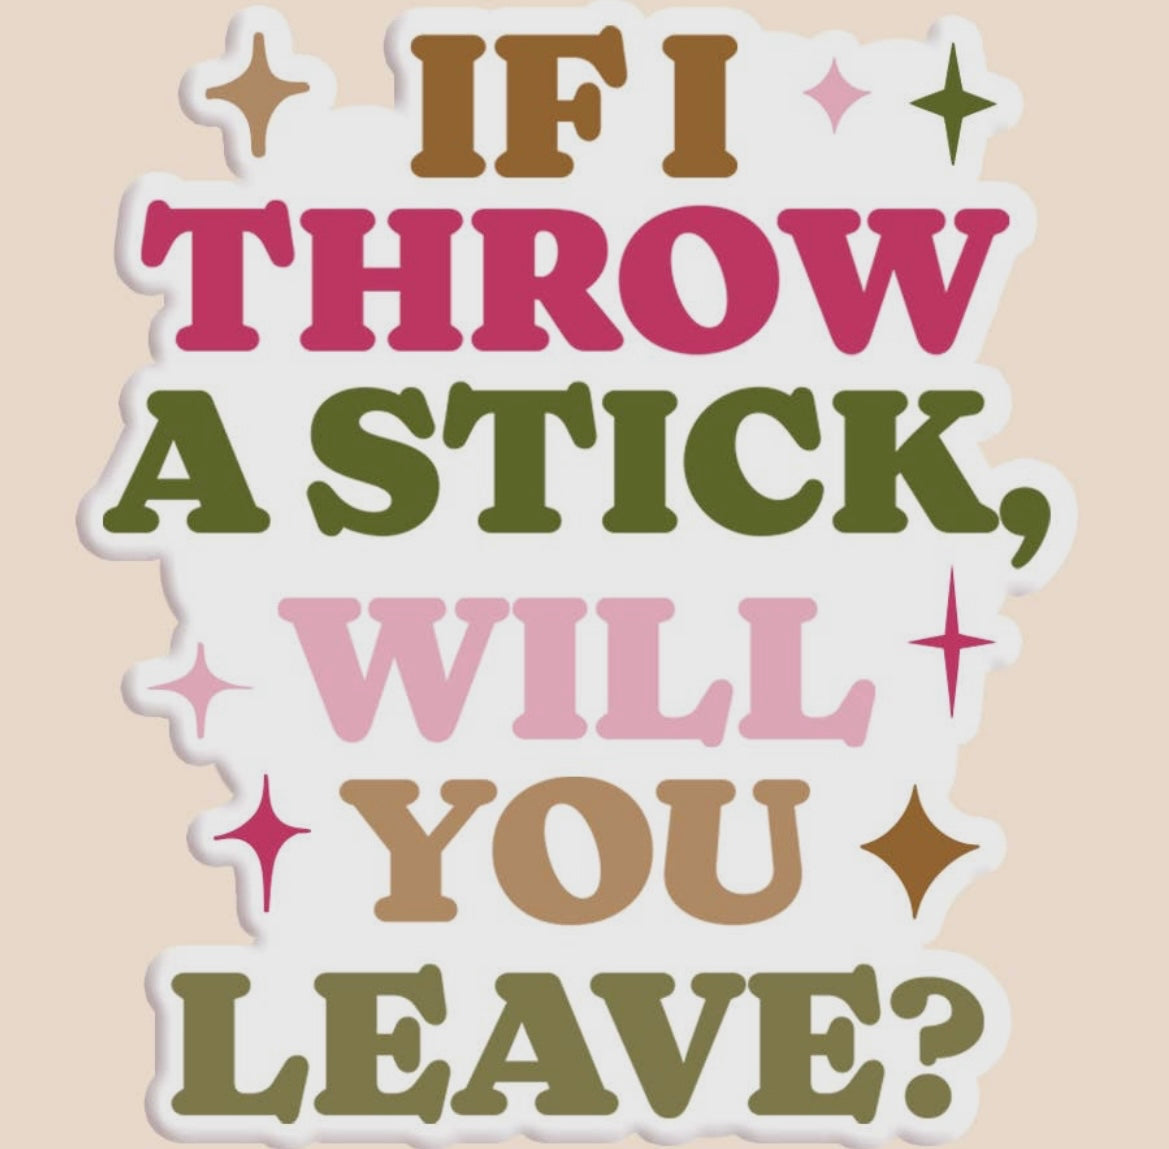 If I Throw A Stick, Will You Leave? Sticker